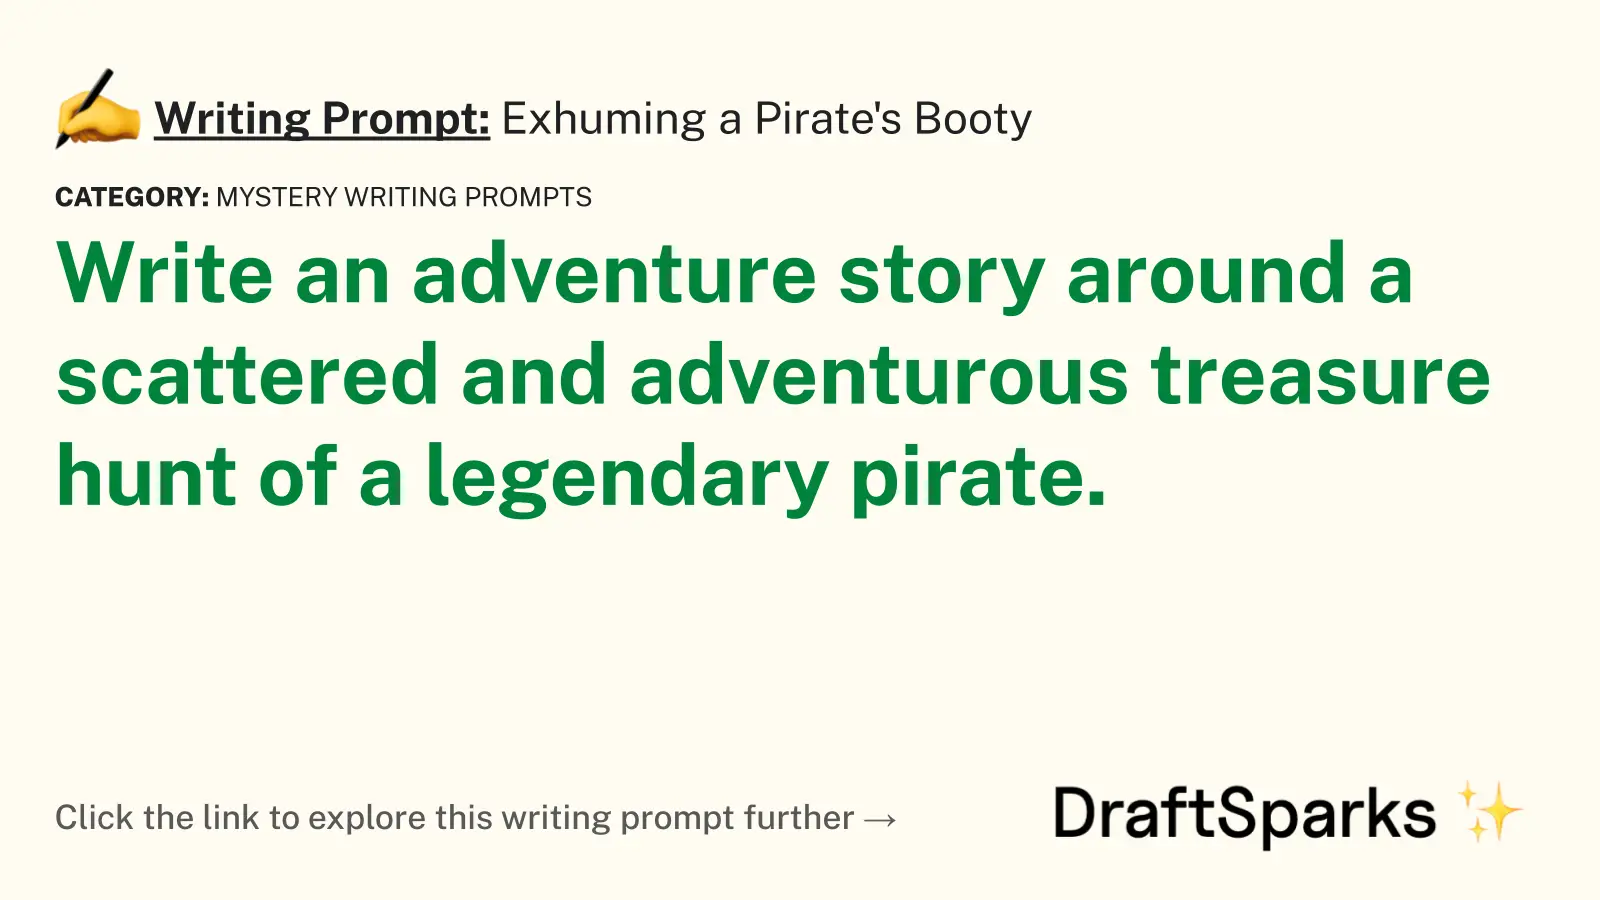 Exhuming a Pirate’s Booty